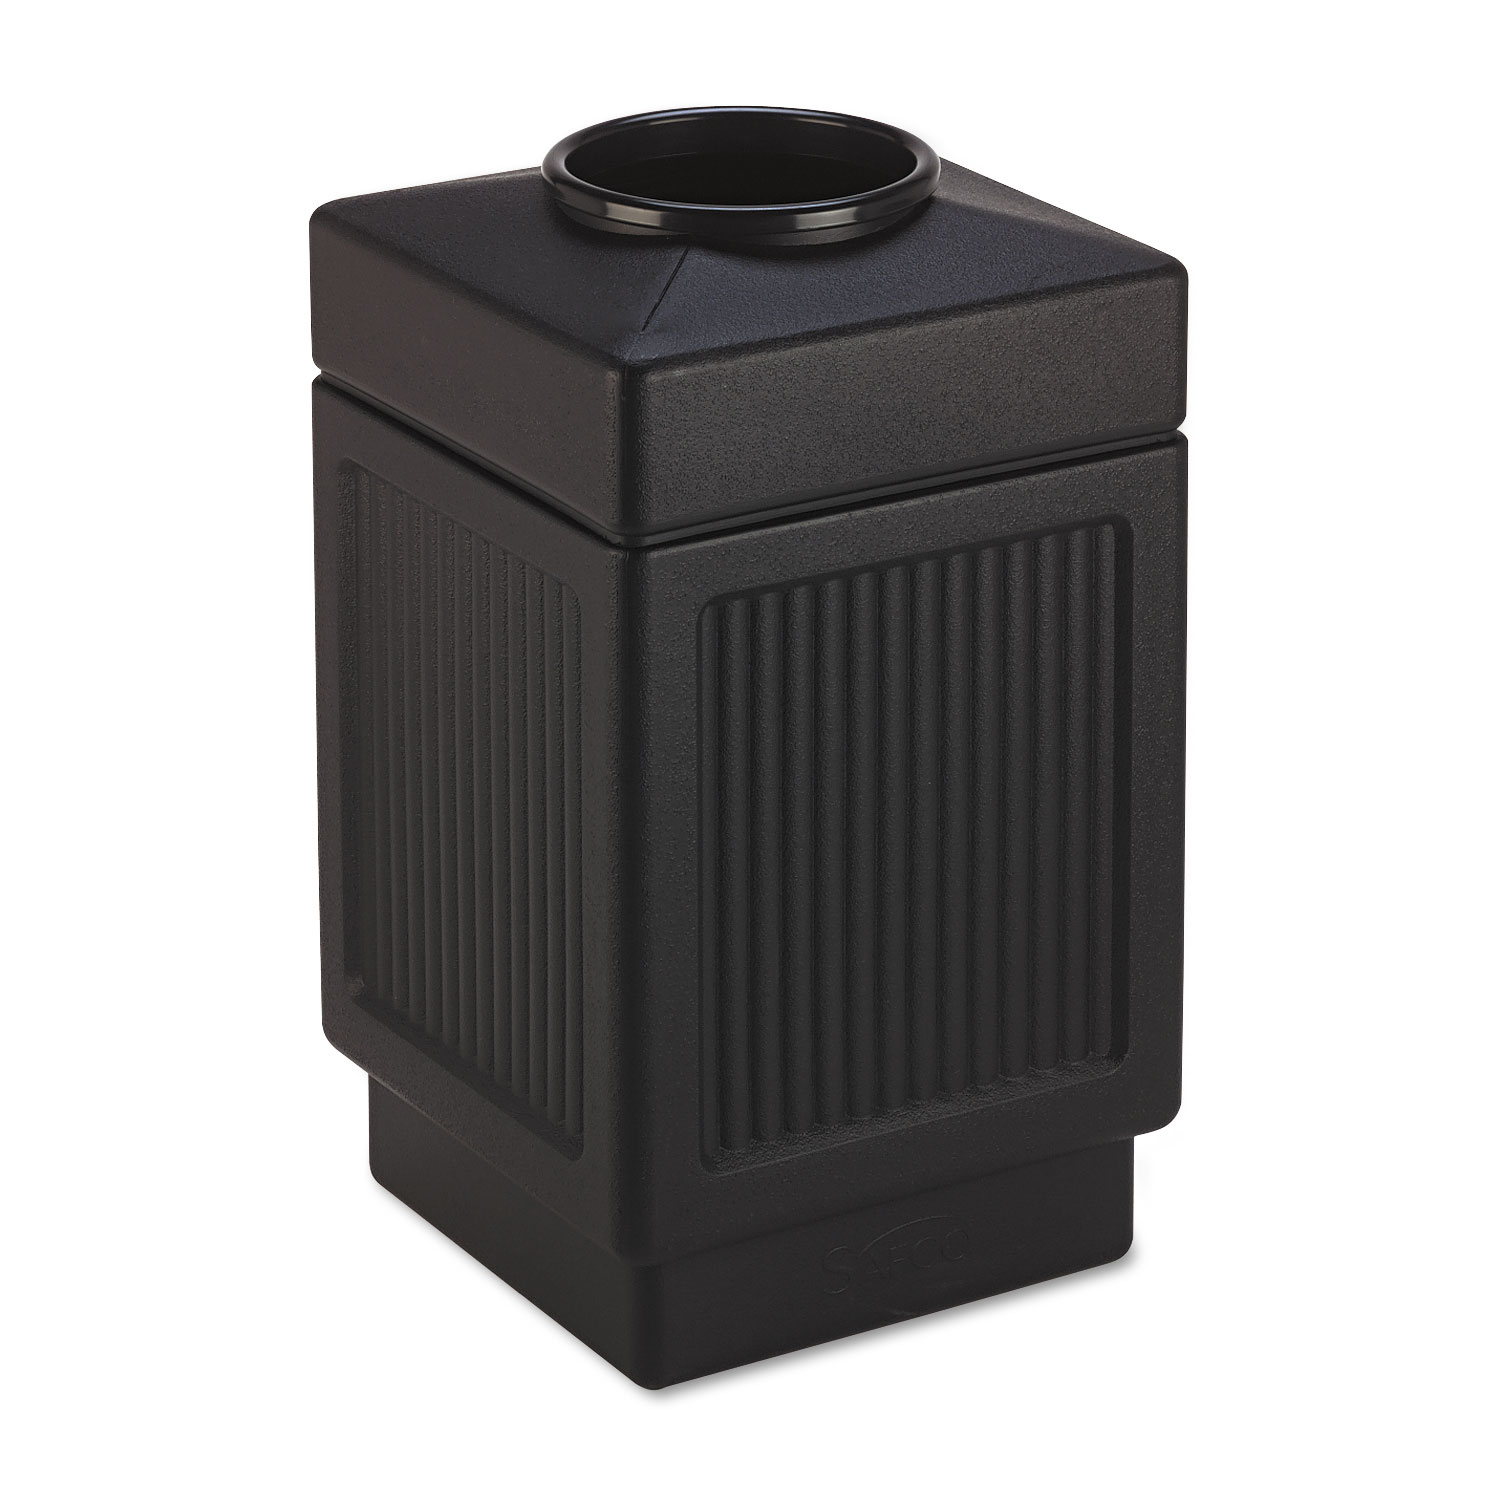  Safco 9475BL Canmeleon Top-Open Receptacle, Square, Polyethylene, 38 gal, Textured Black (SAF9475BL) 